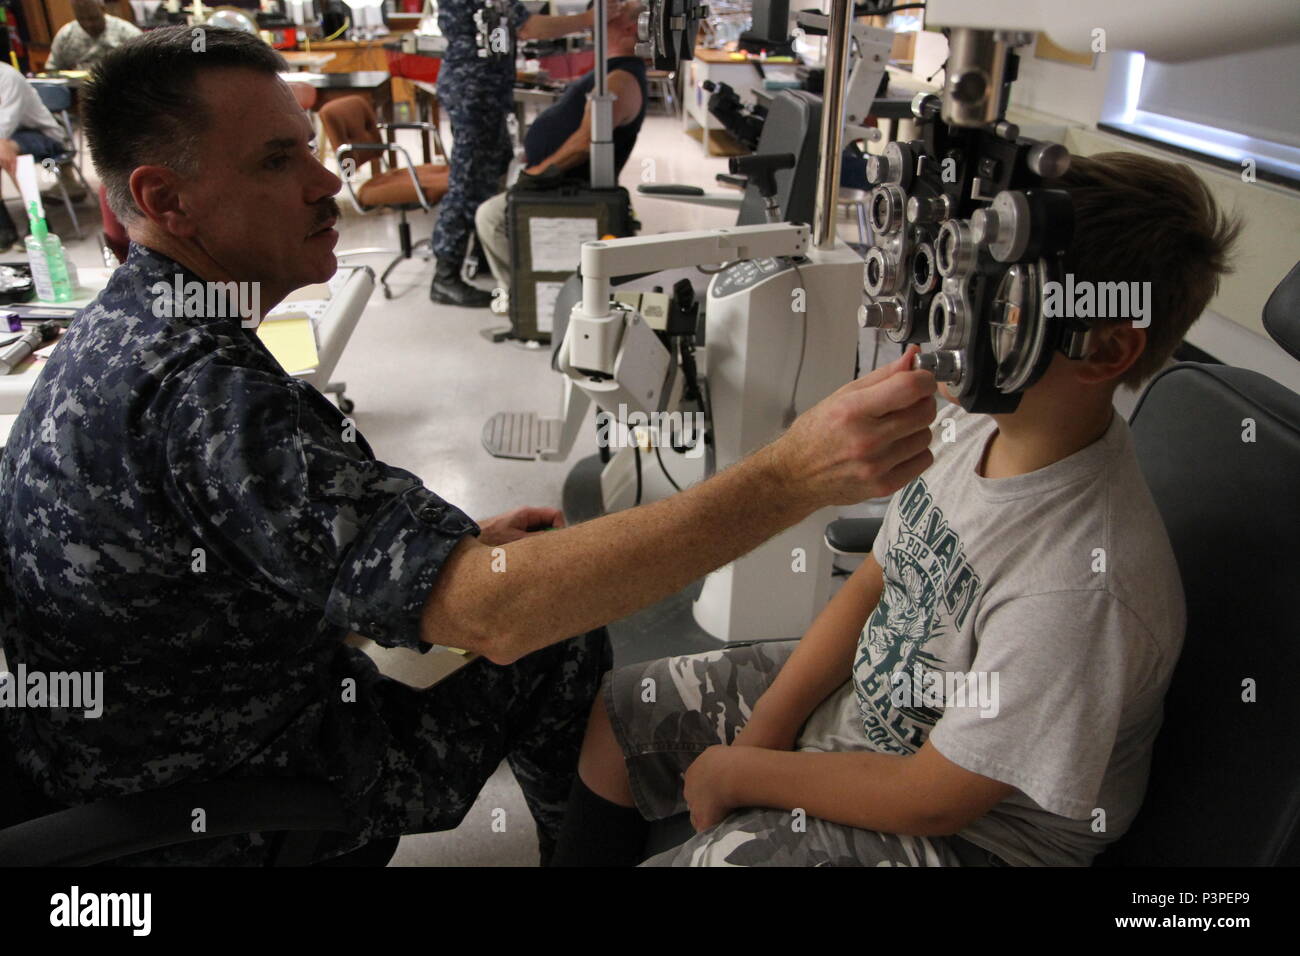 Capt. Mason Philbrook, an optometrist from the Navy Operational Support Center out of Quincy, Mass., gives a young boy an eye exam using a phoropter during the Greater Chenango Cares Innovative Readiness Training event, July 20, 2016.  Greater Chenango Cares is one of the IRT events that provides real-world training in a joint civil-military environment while delivering world-class medical care to the people of Chenango County, N.Y., from July 15-24. Stock Photo